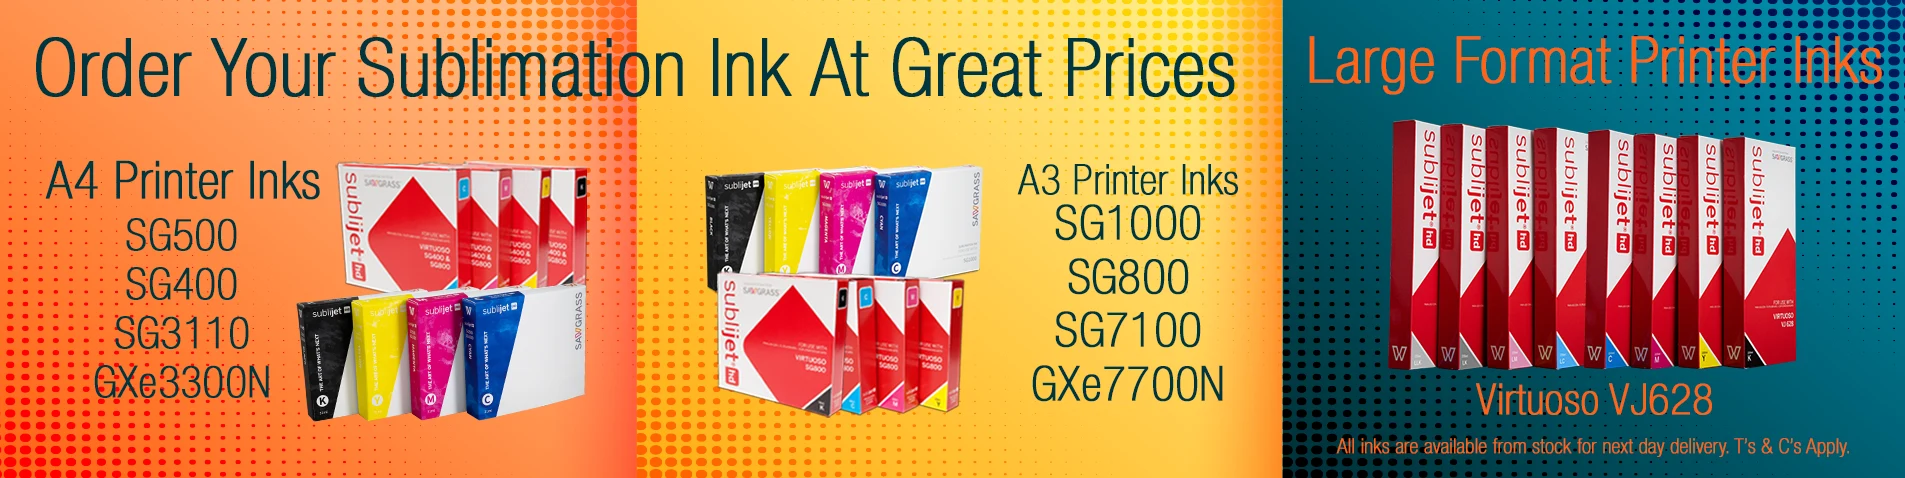 Dye Sublimation Printing, Sublimation Blanks & Inks, Heat Presses, Printers